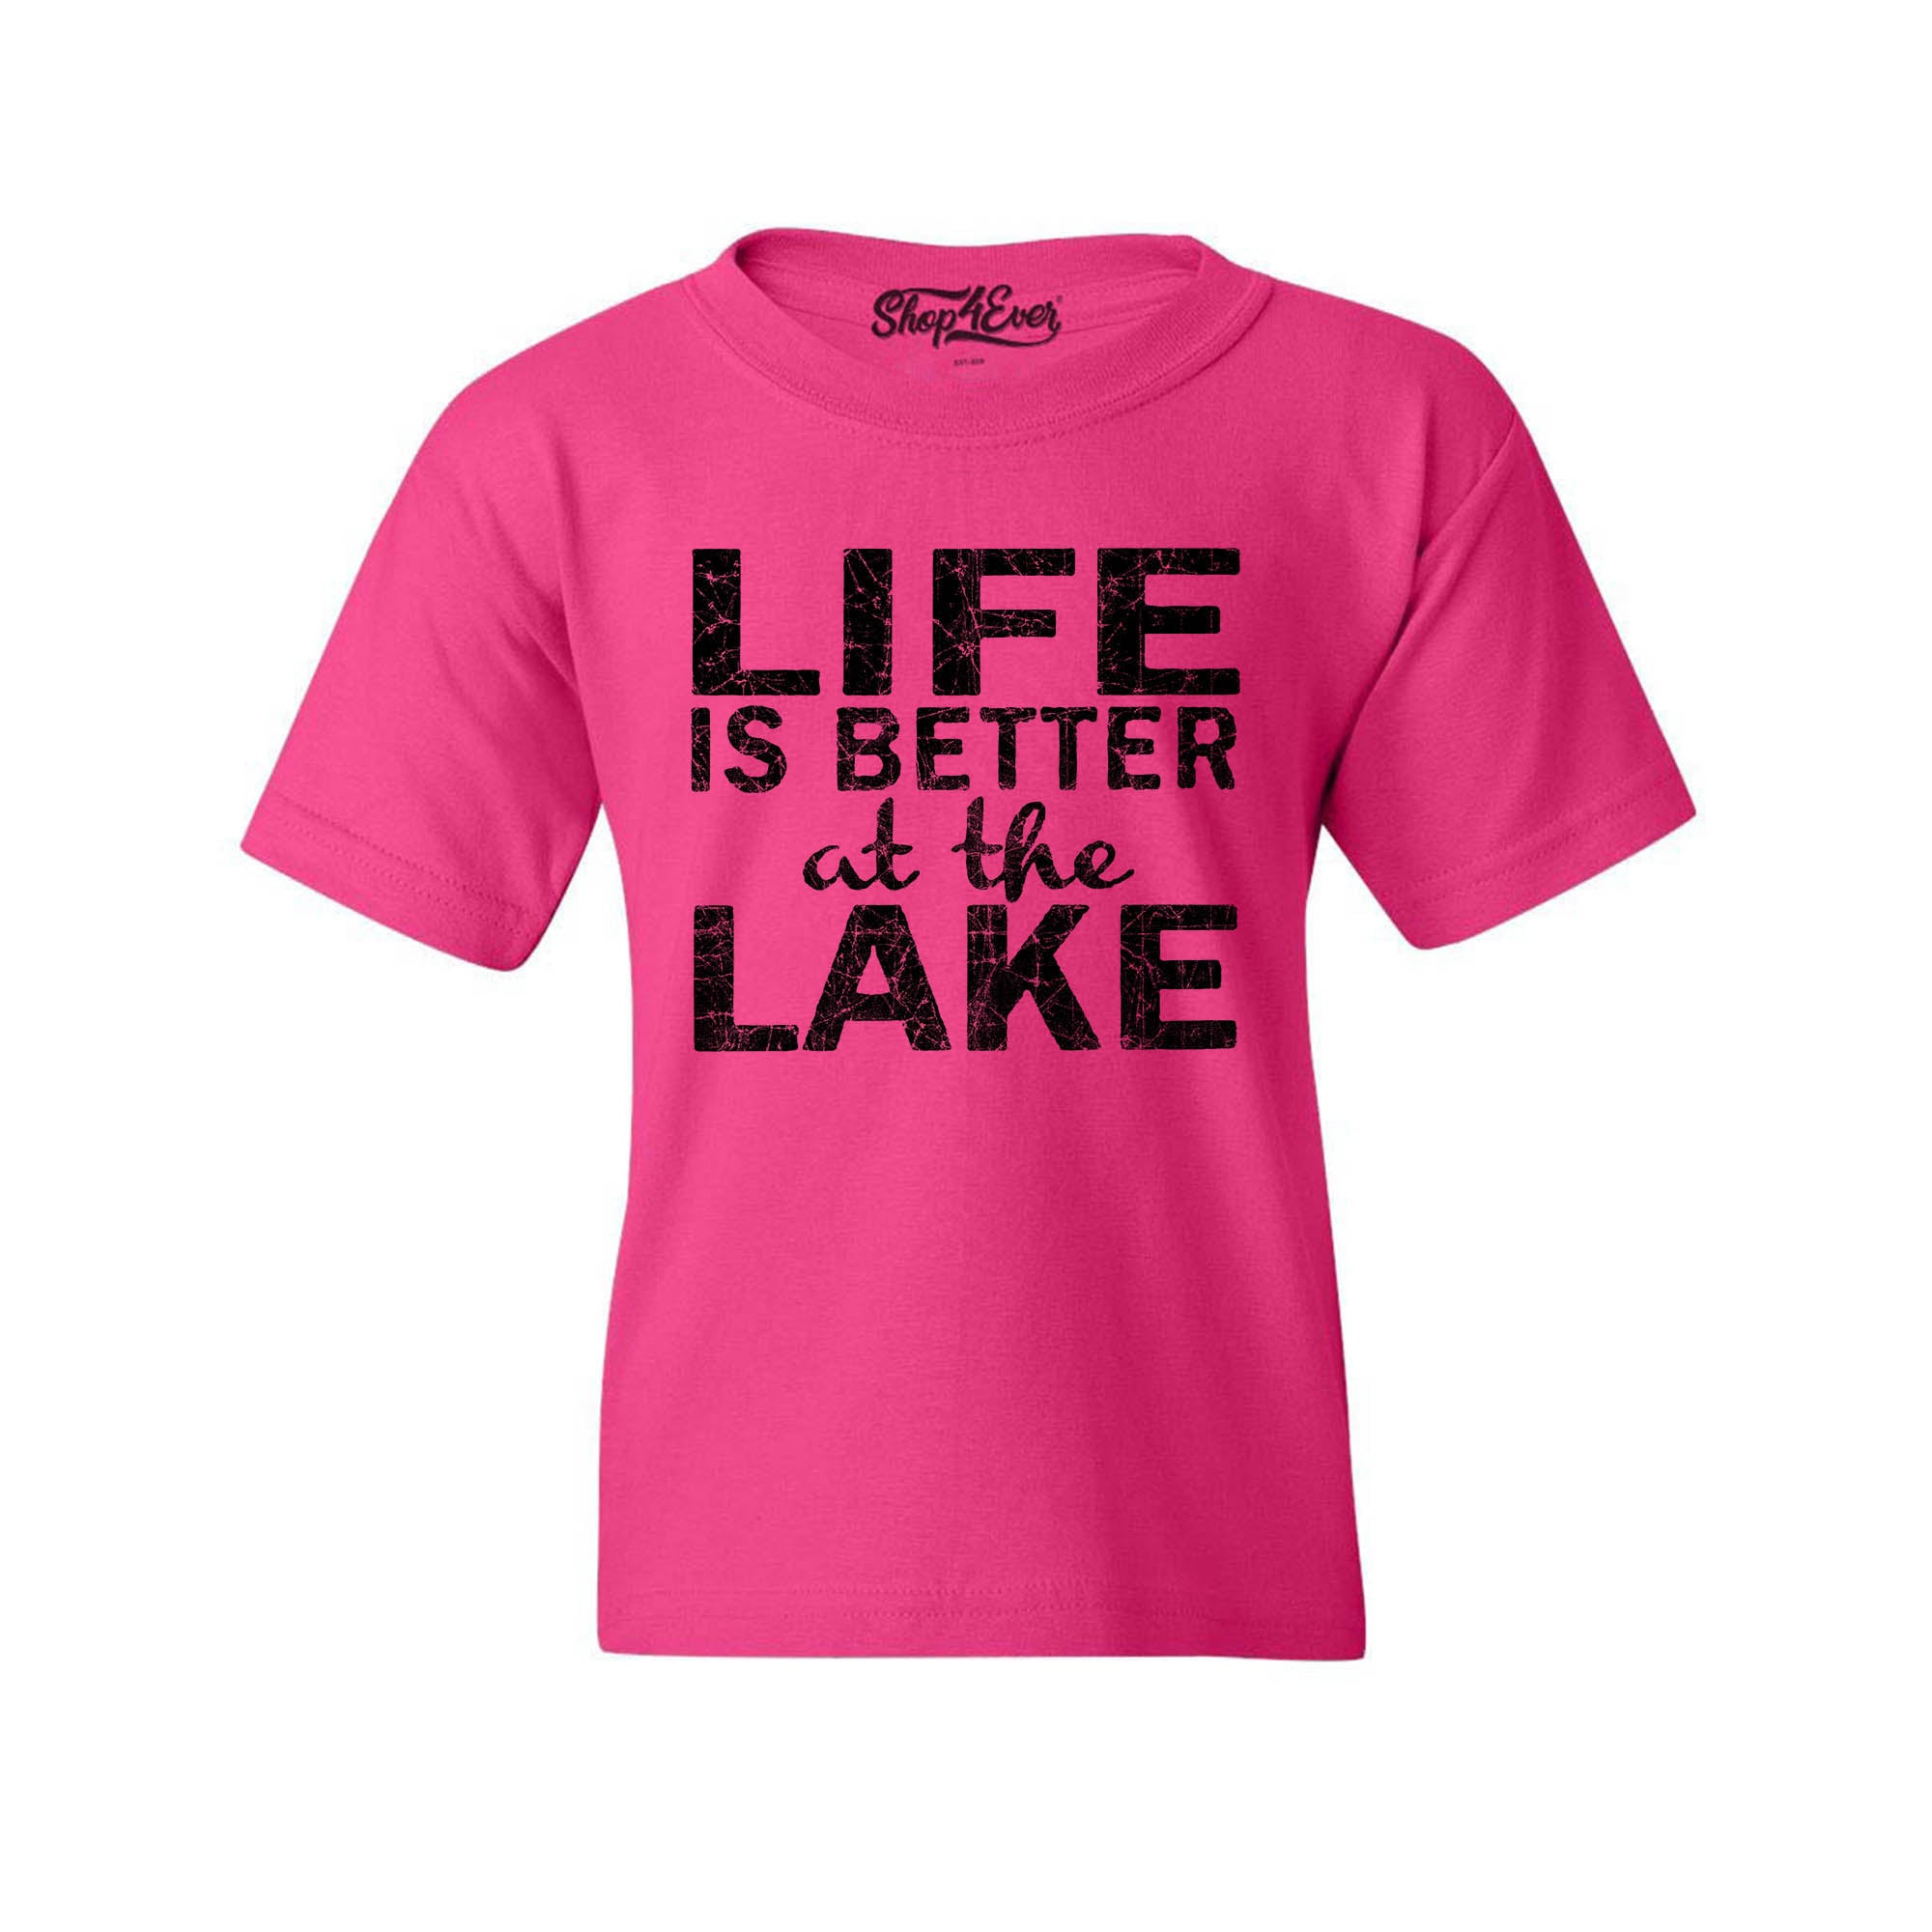 Life is Better at The Lake Black Youth's T-Shirt Sayings Kids Child Tee Shirts